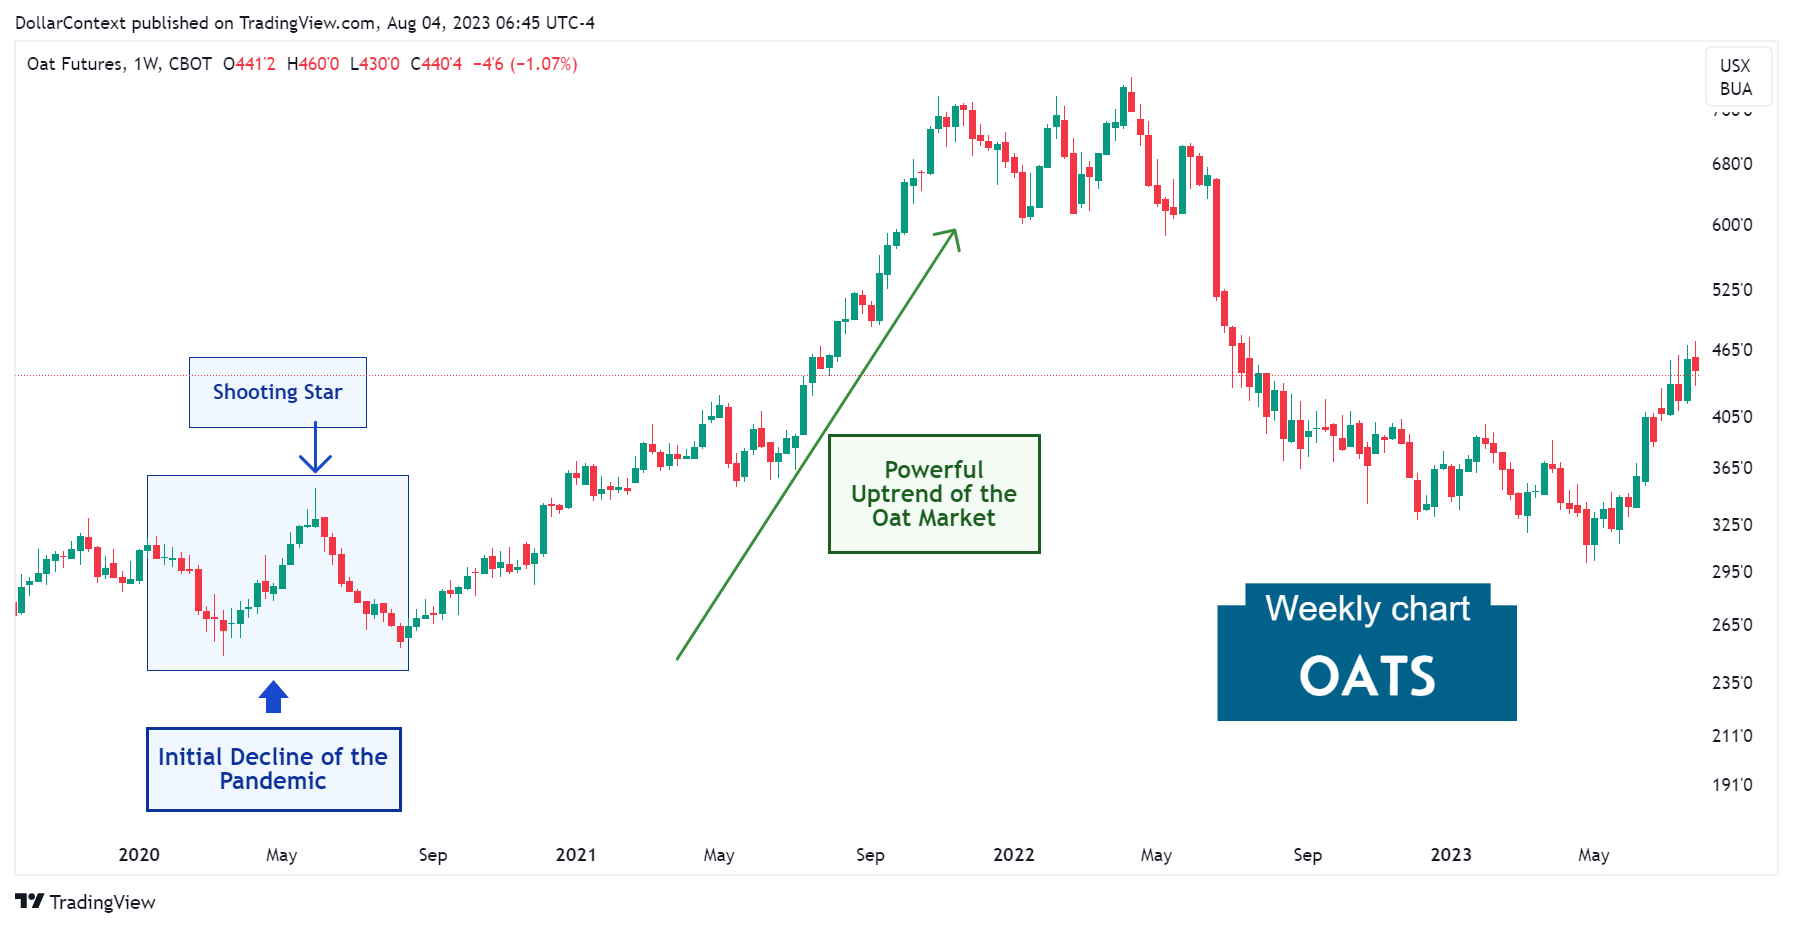 Oat Futures: The Sustained Uptrend in 2020 and 2021 (Weekly Chart)